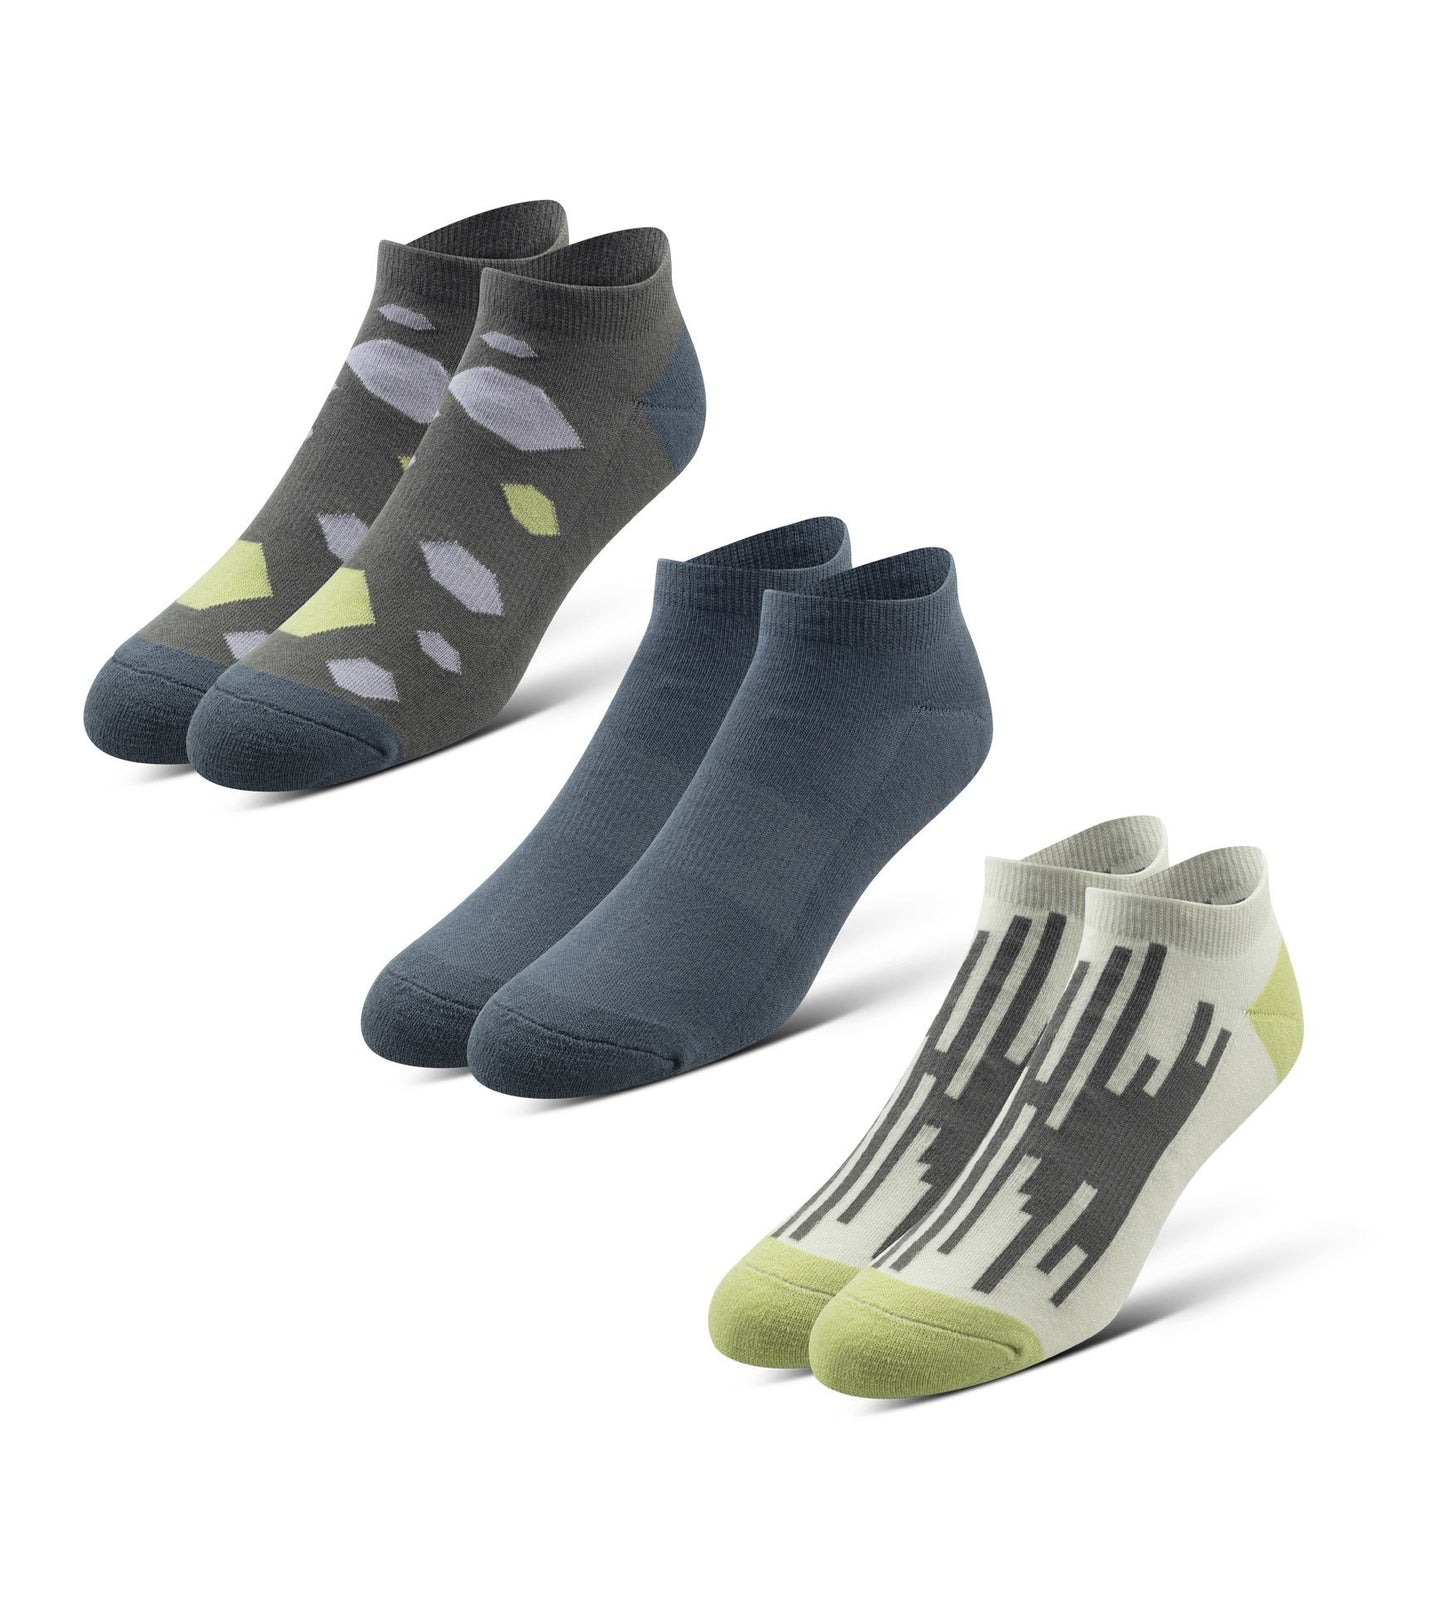 Cushion Low-Cut Socks 3 Pack in blue, green, and grey